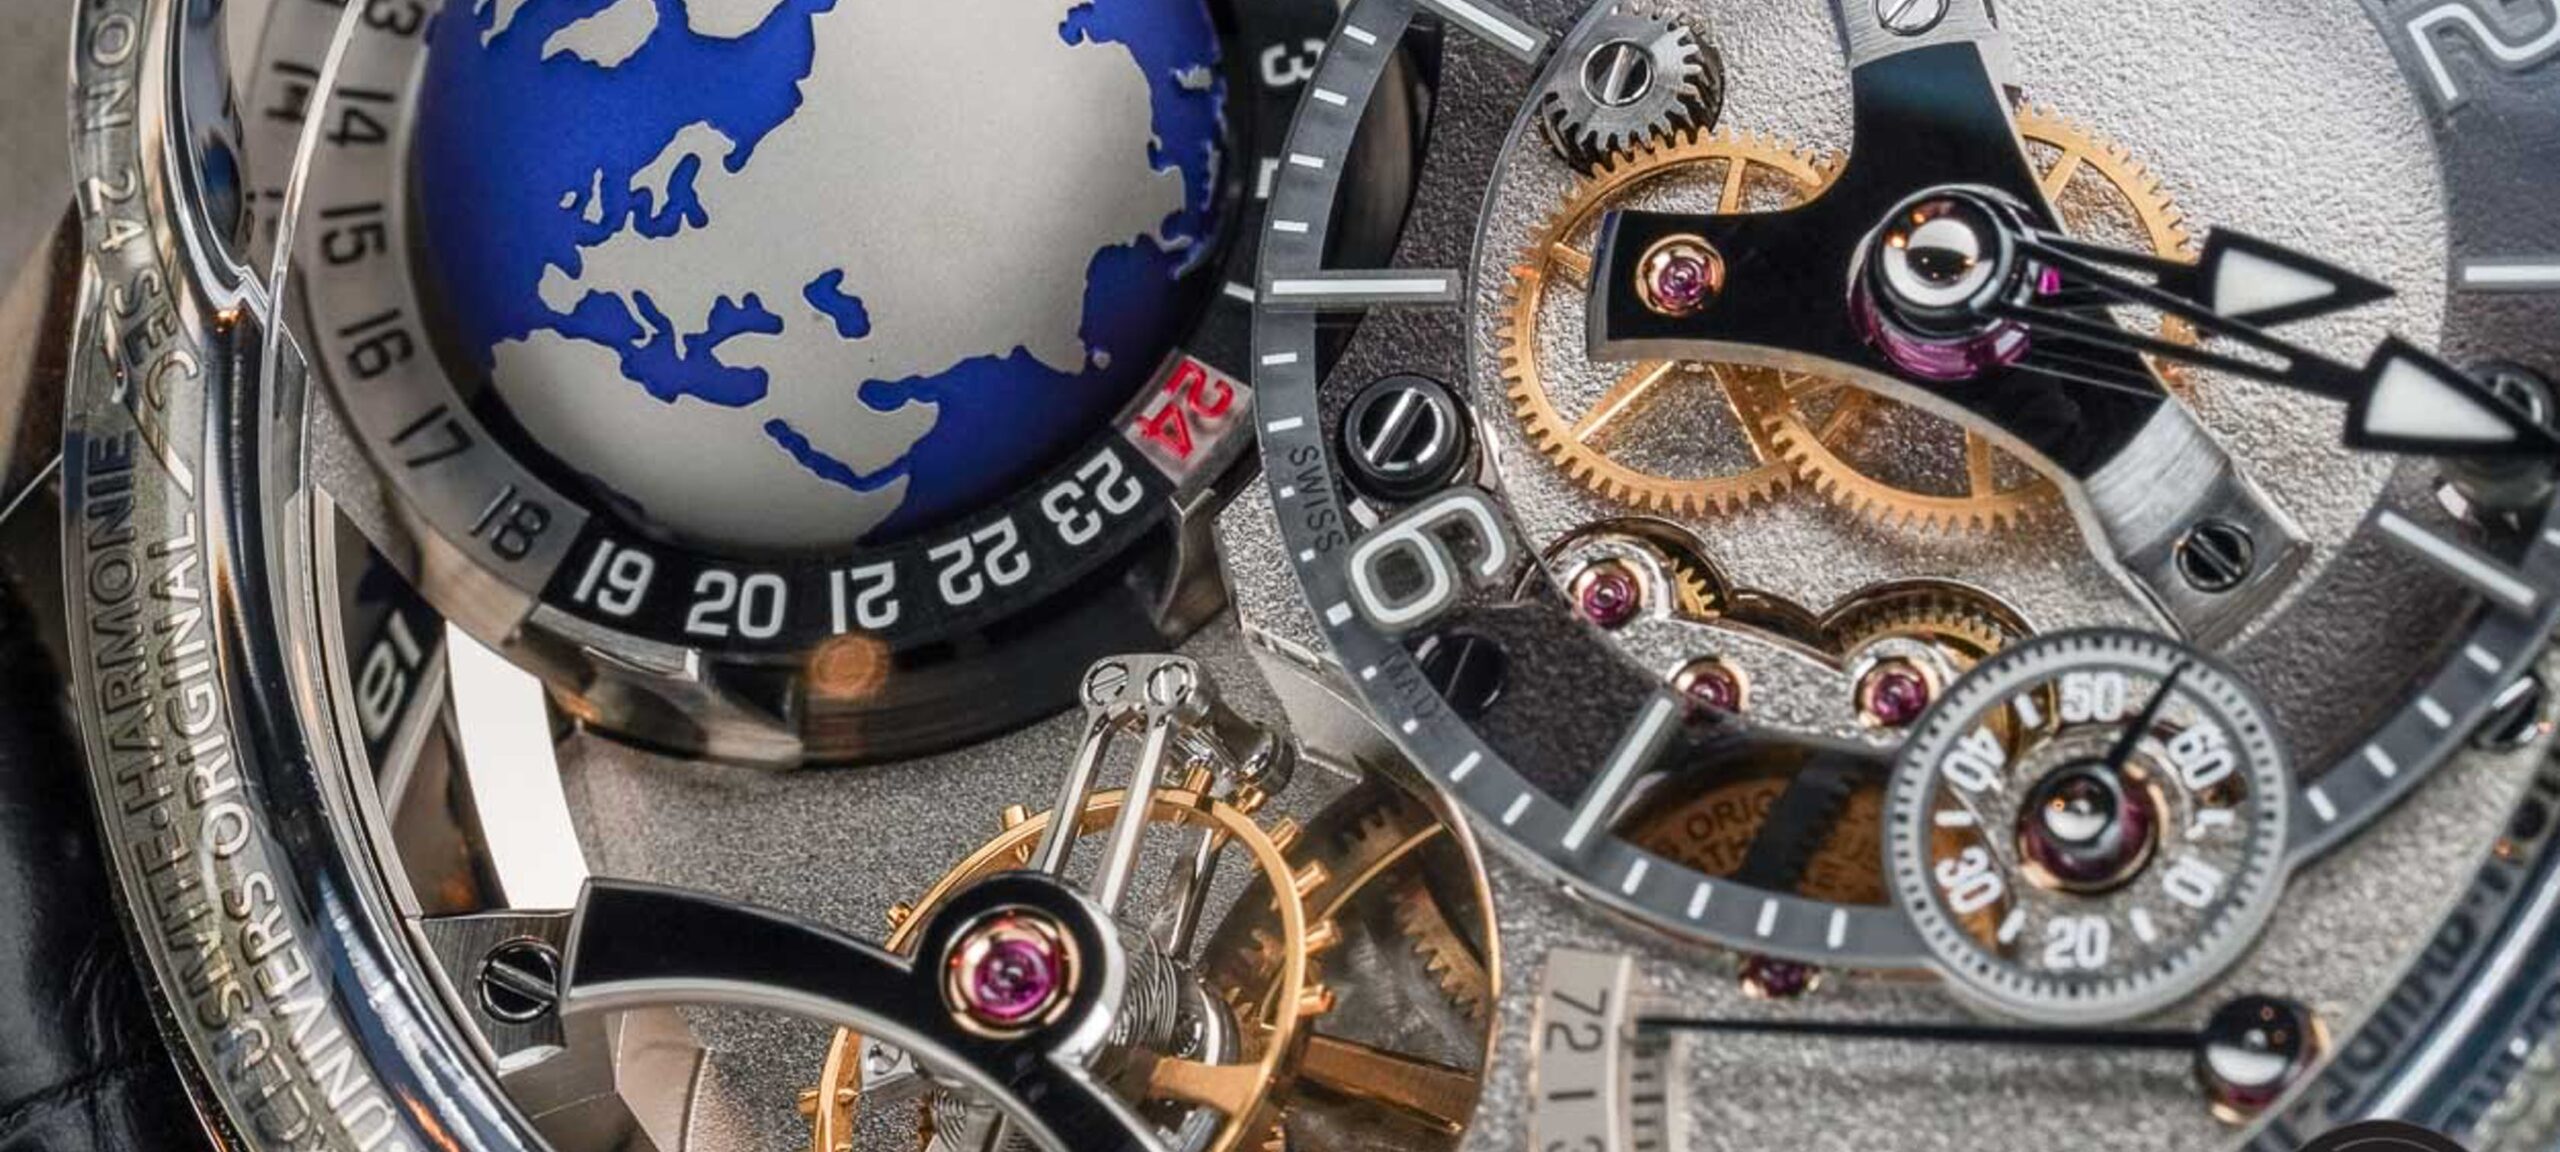 Have Watch Enthusiasts Lost Their Sense Of Adventure?